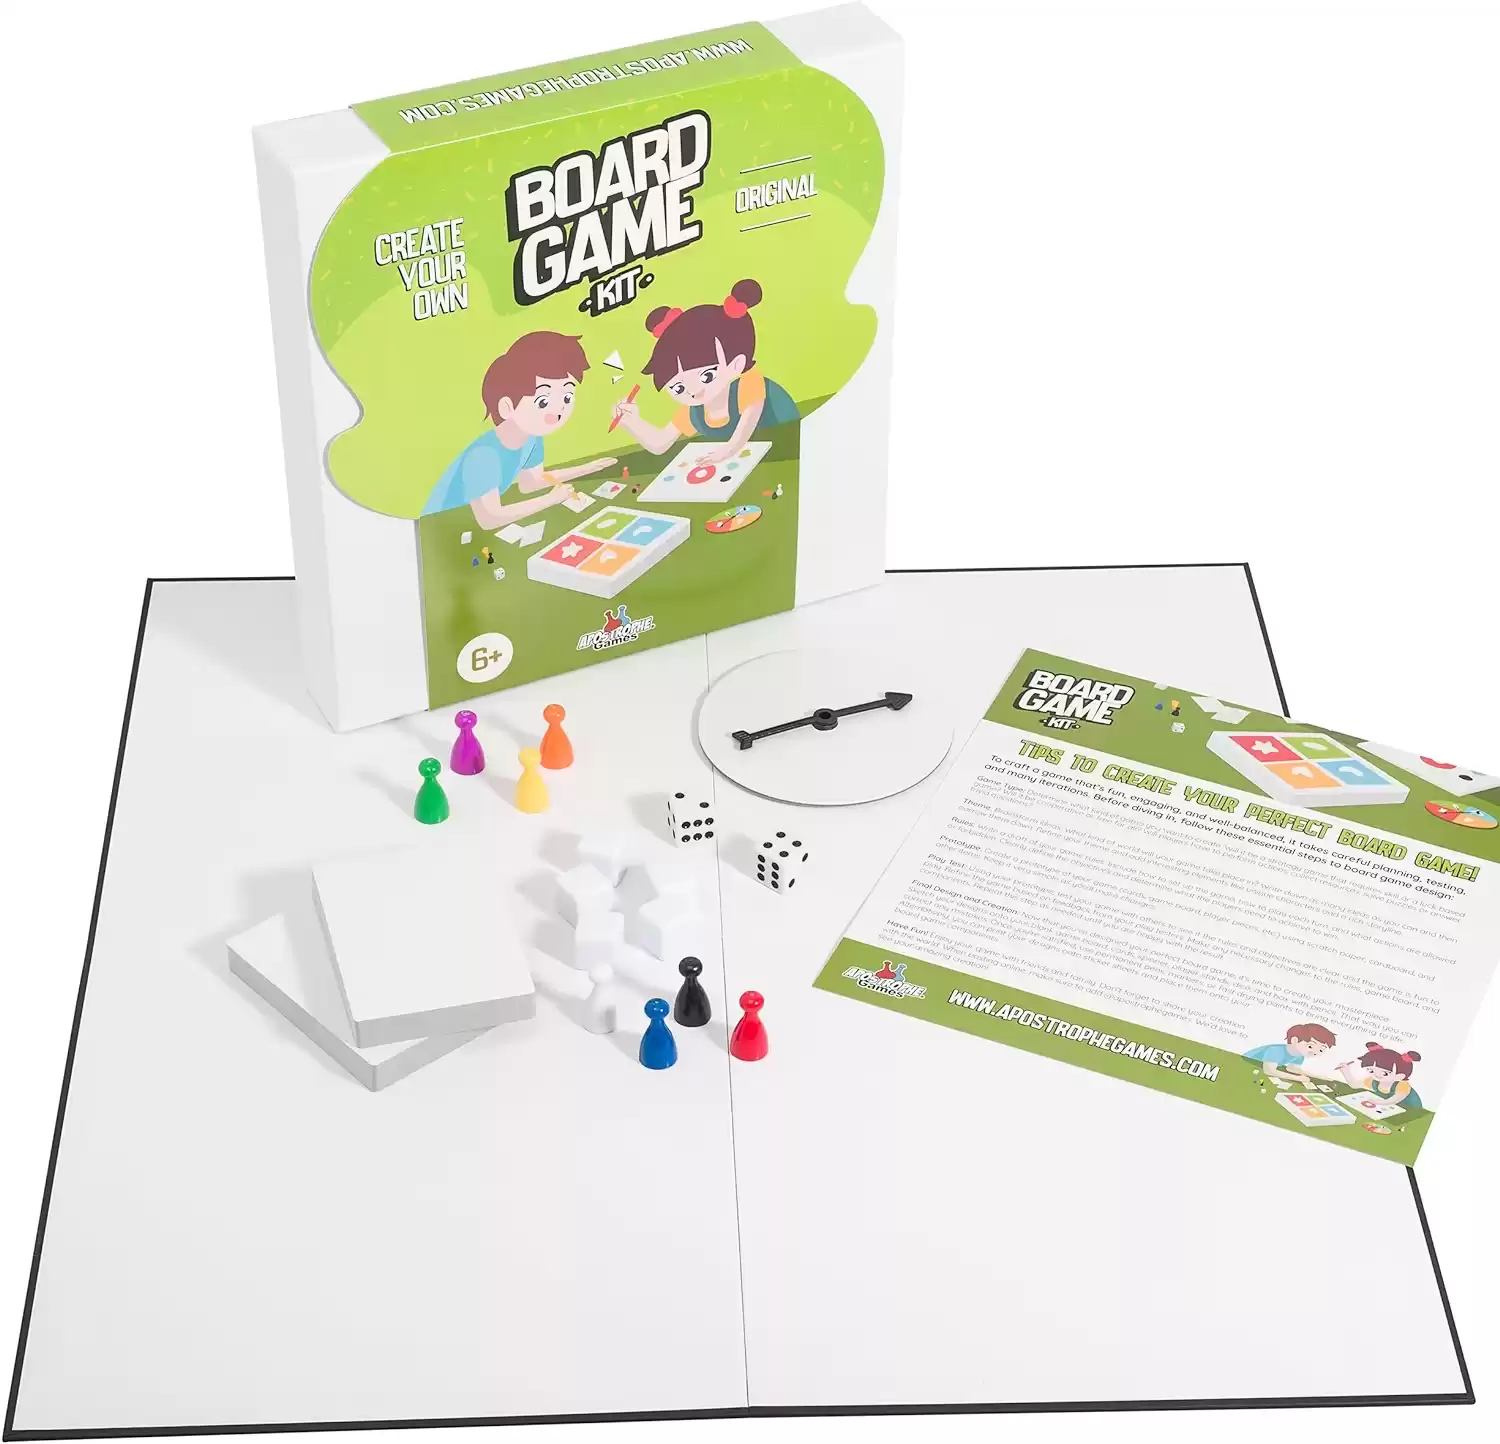 Make your own Board Game Kit